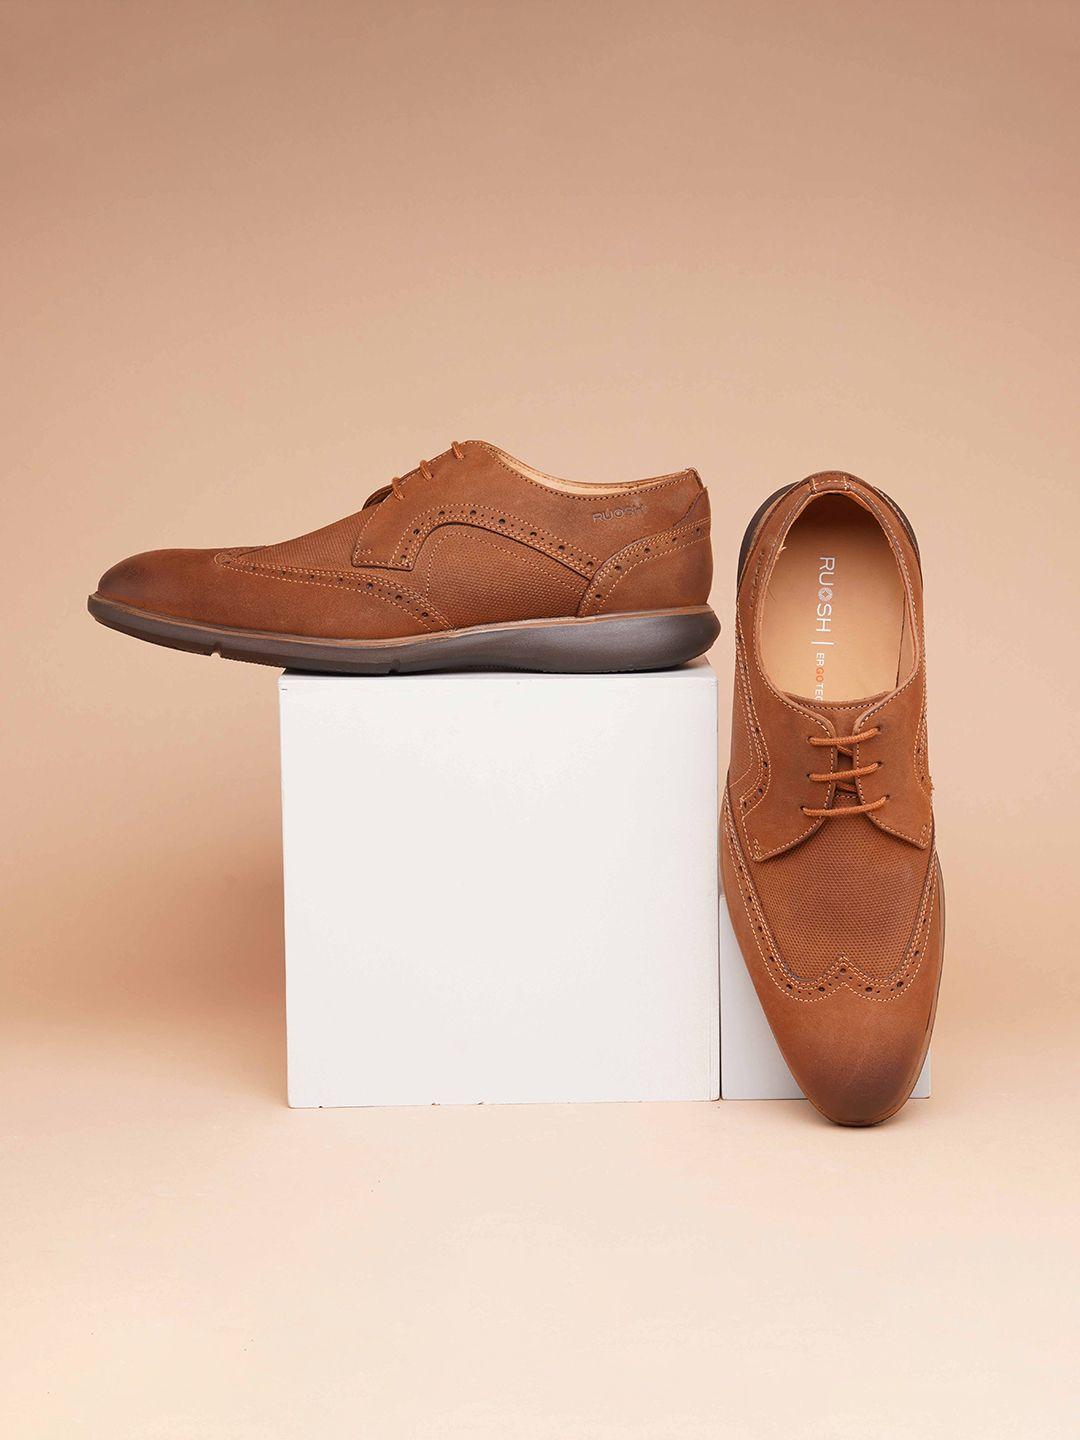 ruosh-men-leather-lace-up-formal-brogues